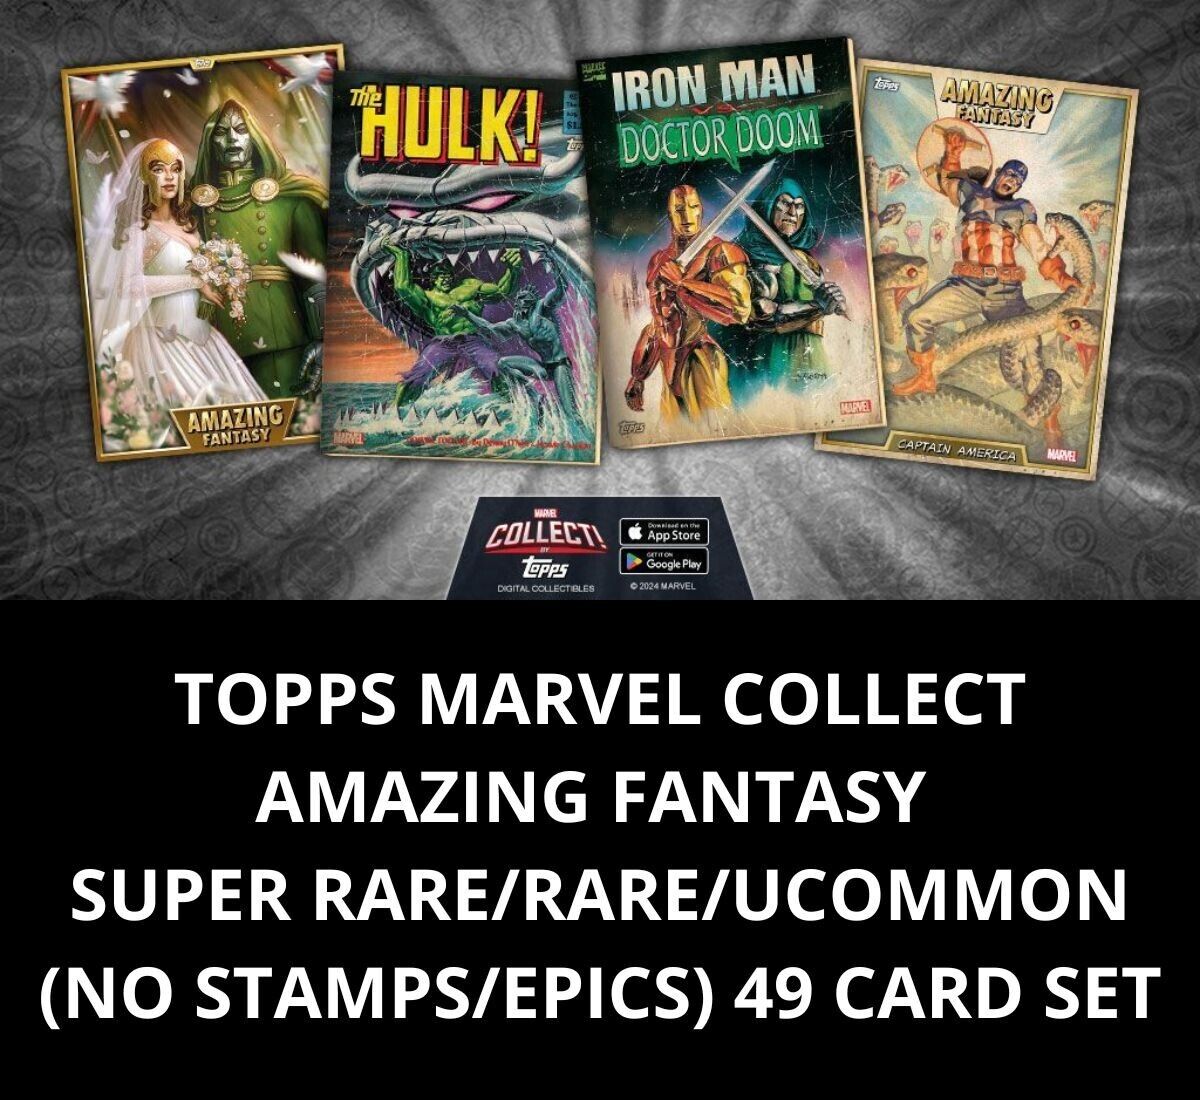 Topps Marvel Collect AMAZING FANTASY SR/R/UC (NO STAMPS/EPICS) 49 CARD SET